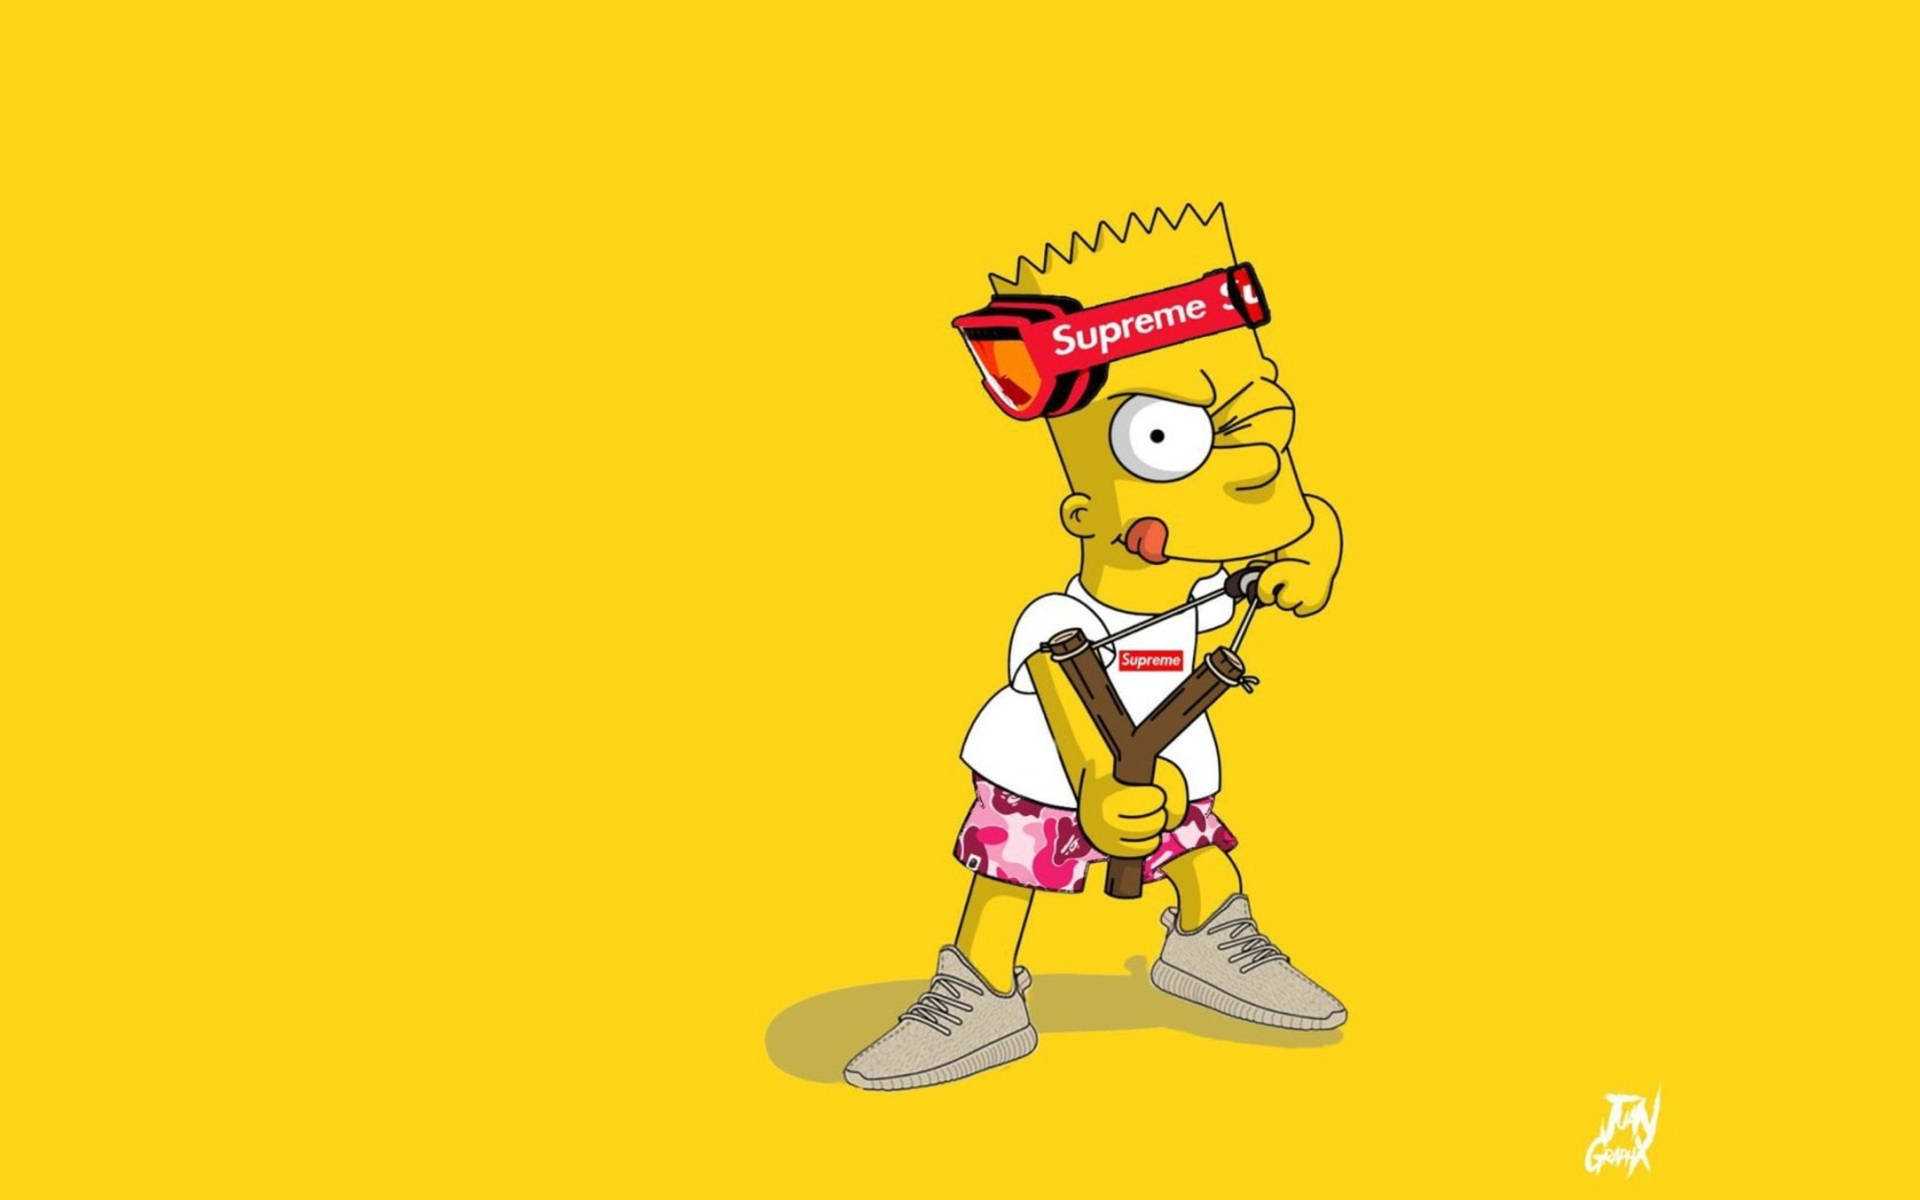 Bartsimpson Dope Supreme Would Be Translated As 